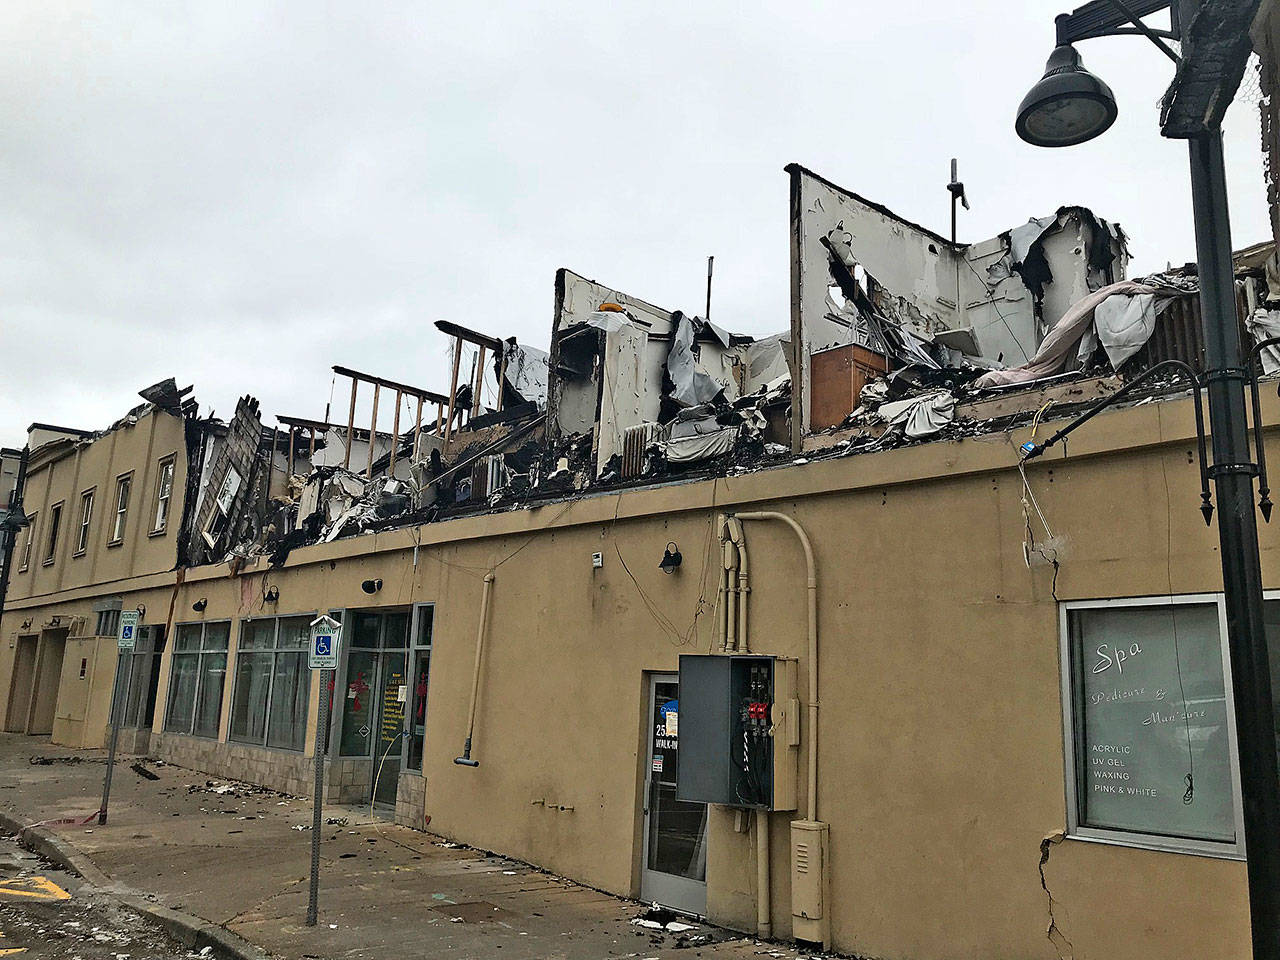 The nearly 100-year-old Heritage Building in downtown Auburn, victim of a devastating fire on Dec. 26, 2017, will come down, possibly within weeks, depending on the city’s issuance of demolition permits. Its owner has already listed the property for sale. MARK KLAAS, Kent Reporter